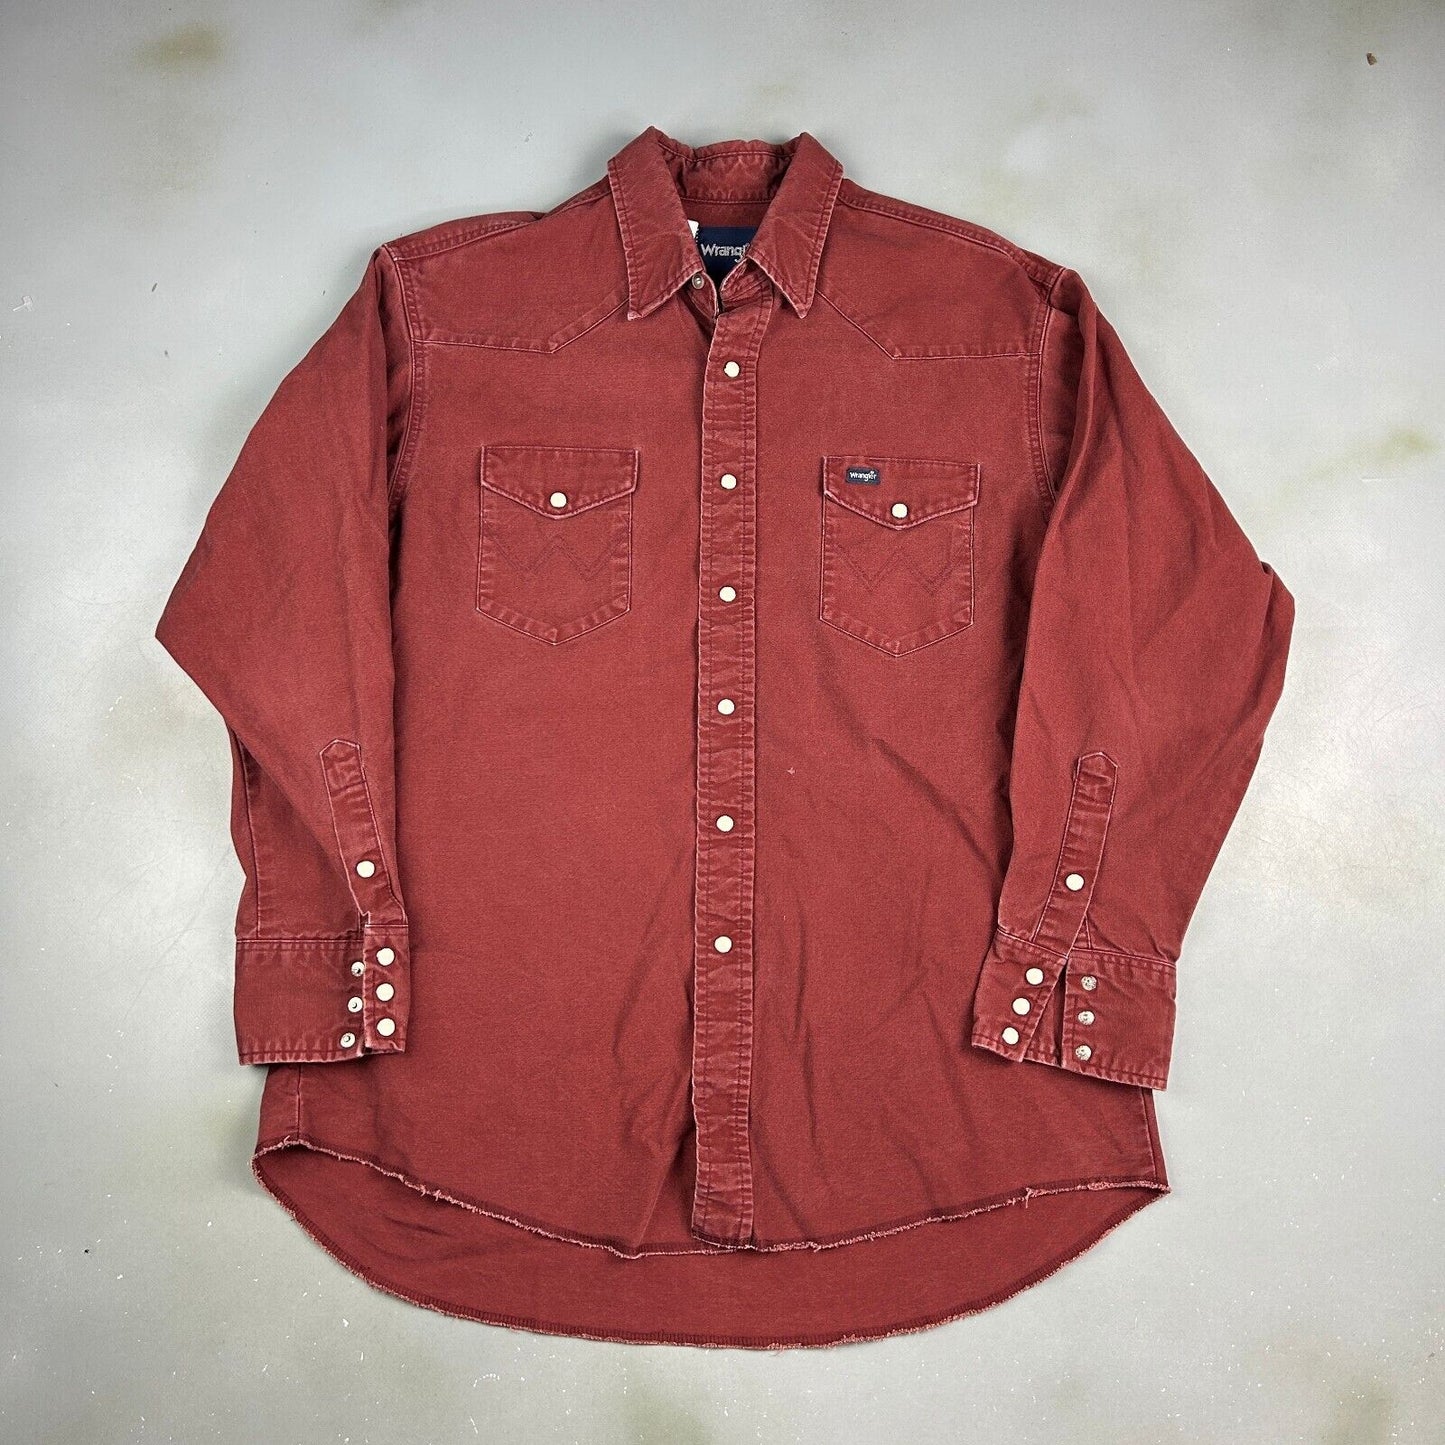 VINTAGE 90s Wrangler Red Pearl Snap Western Button Up Shirt sz L/XL Adult